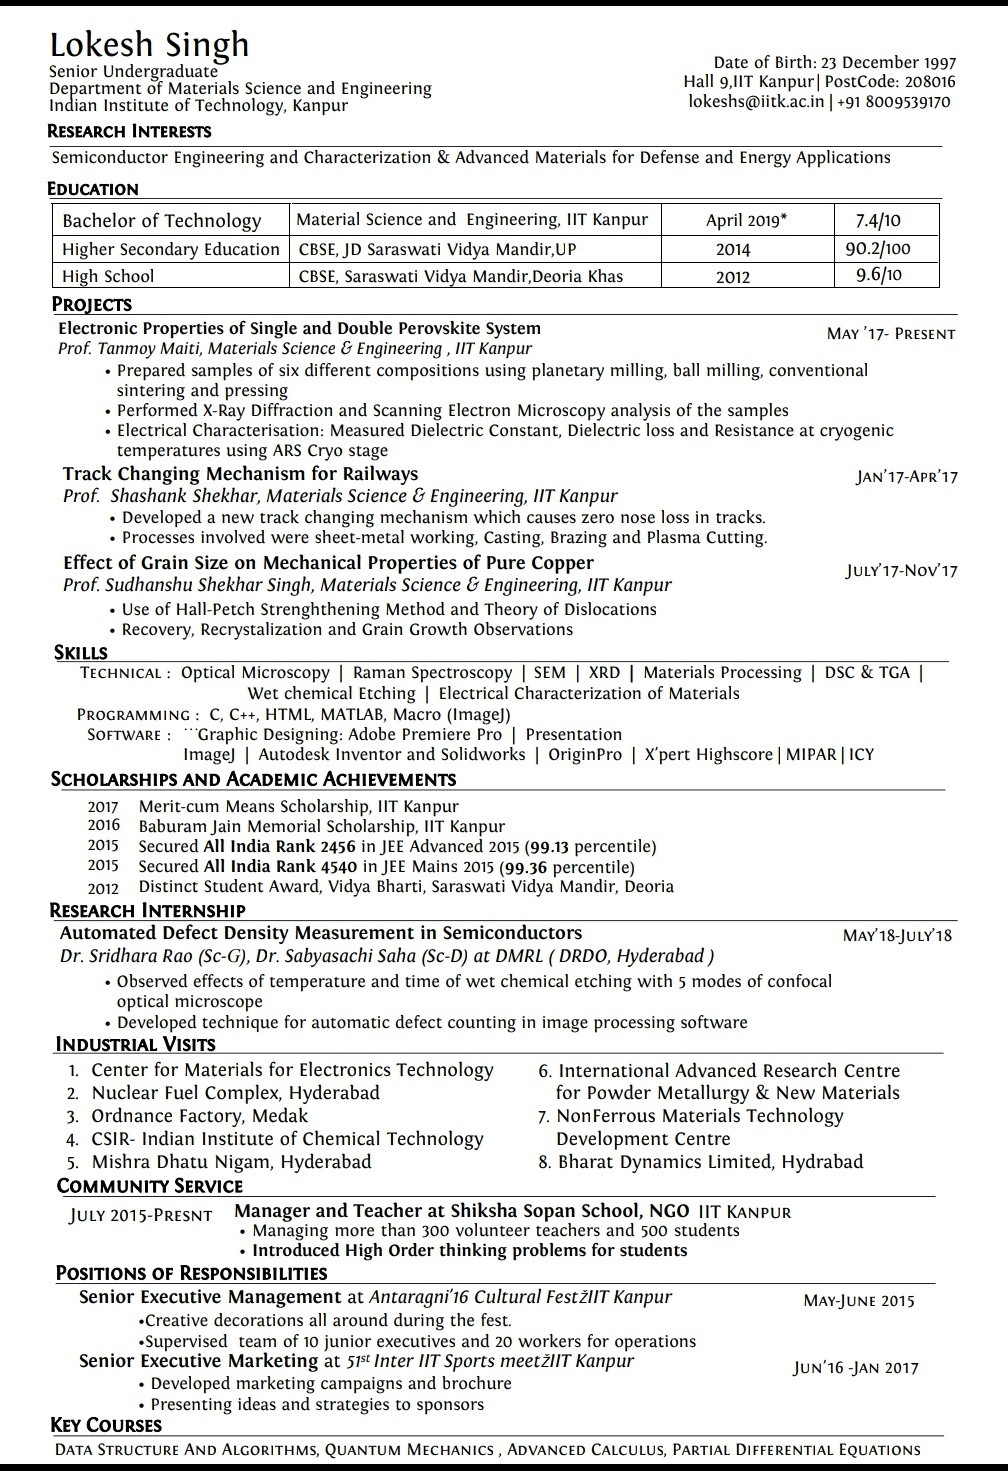 What exactly does the resume of a final year student at IIT look like